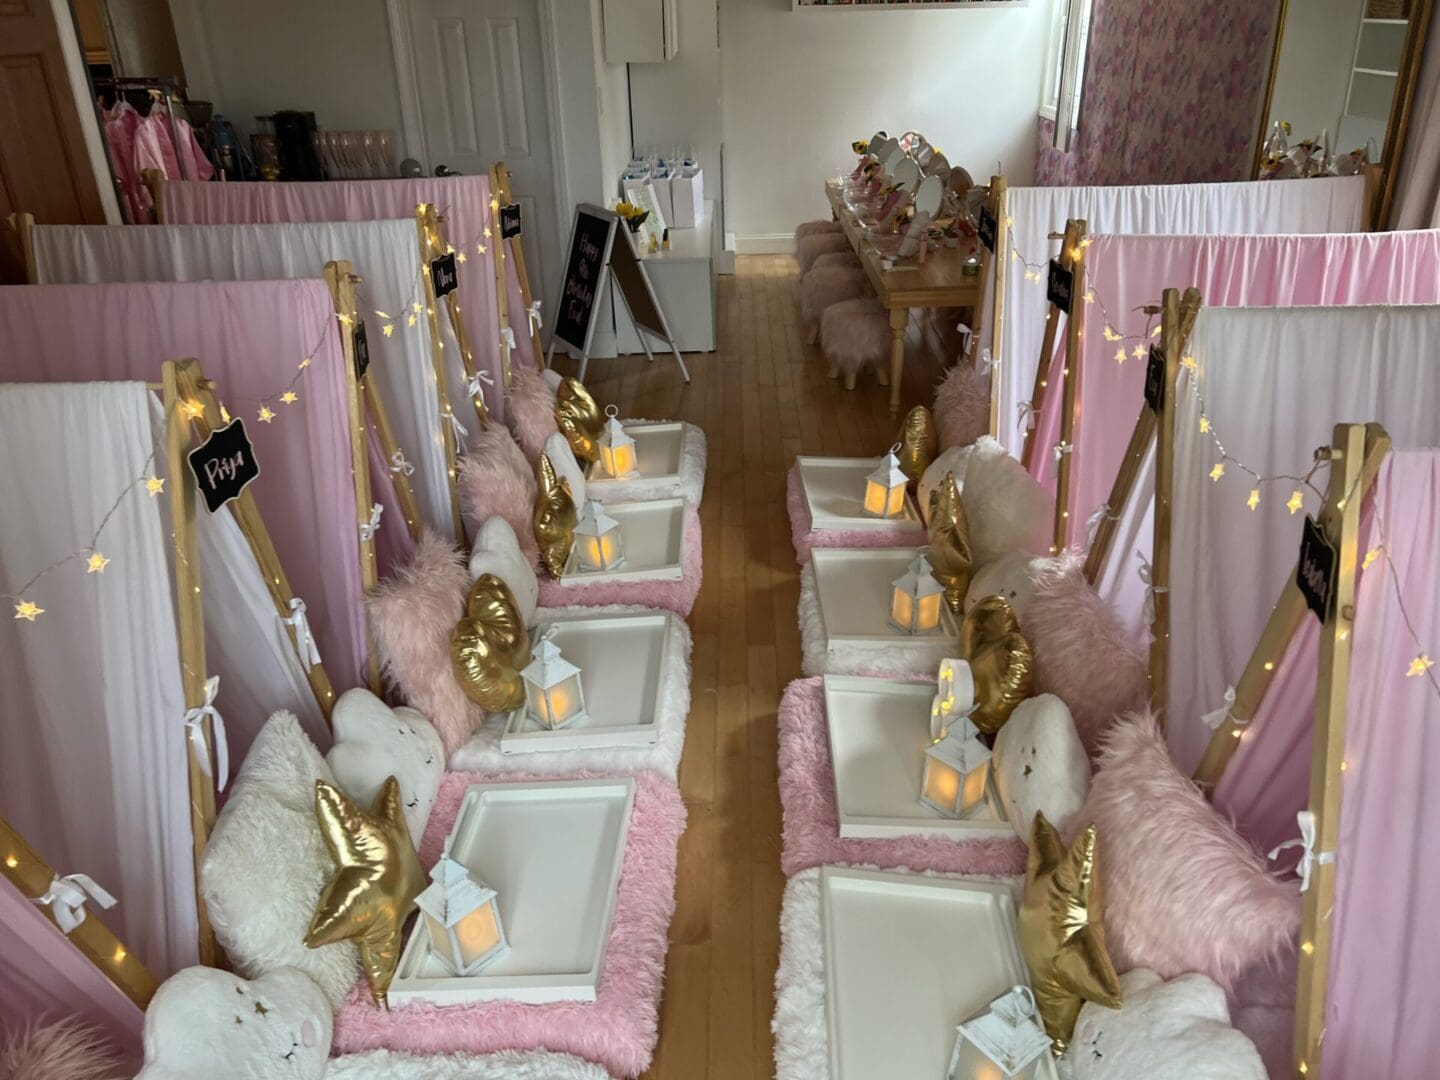 A room filled with pink and gold decorations.